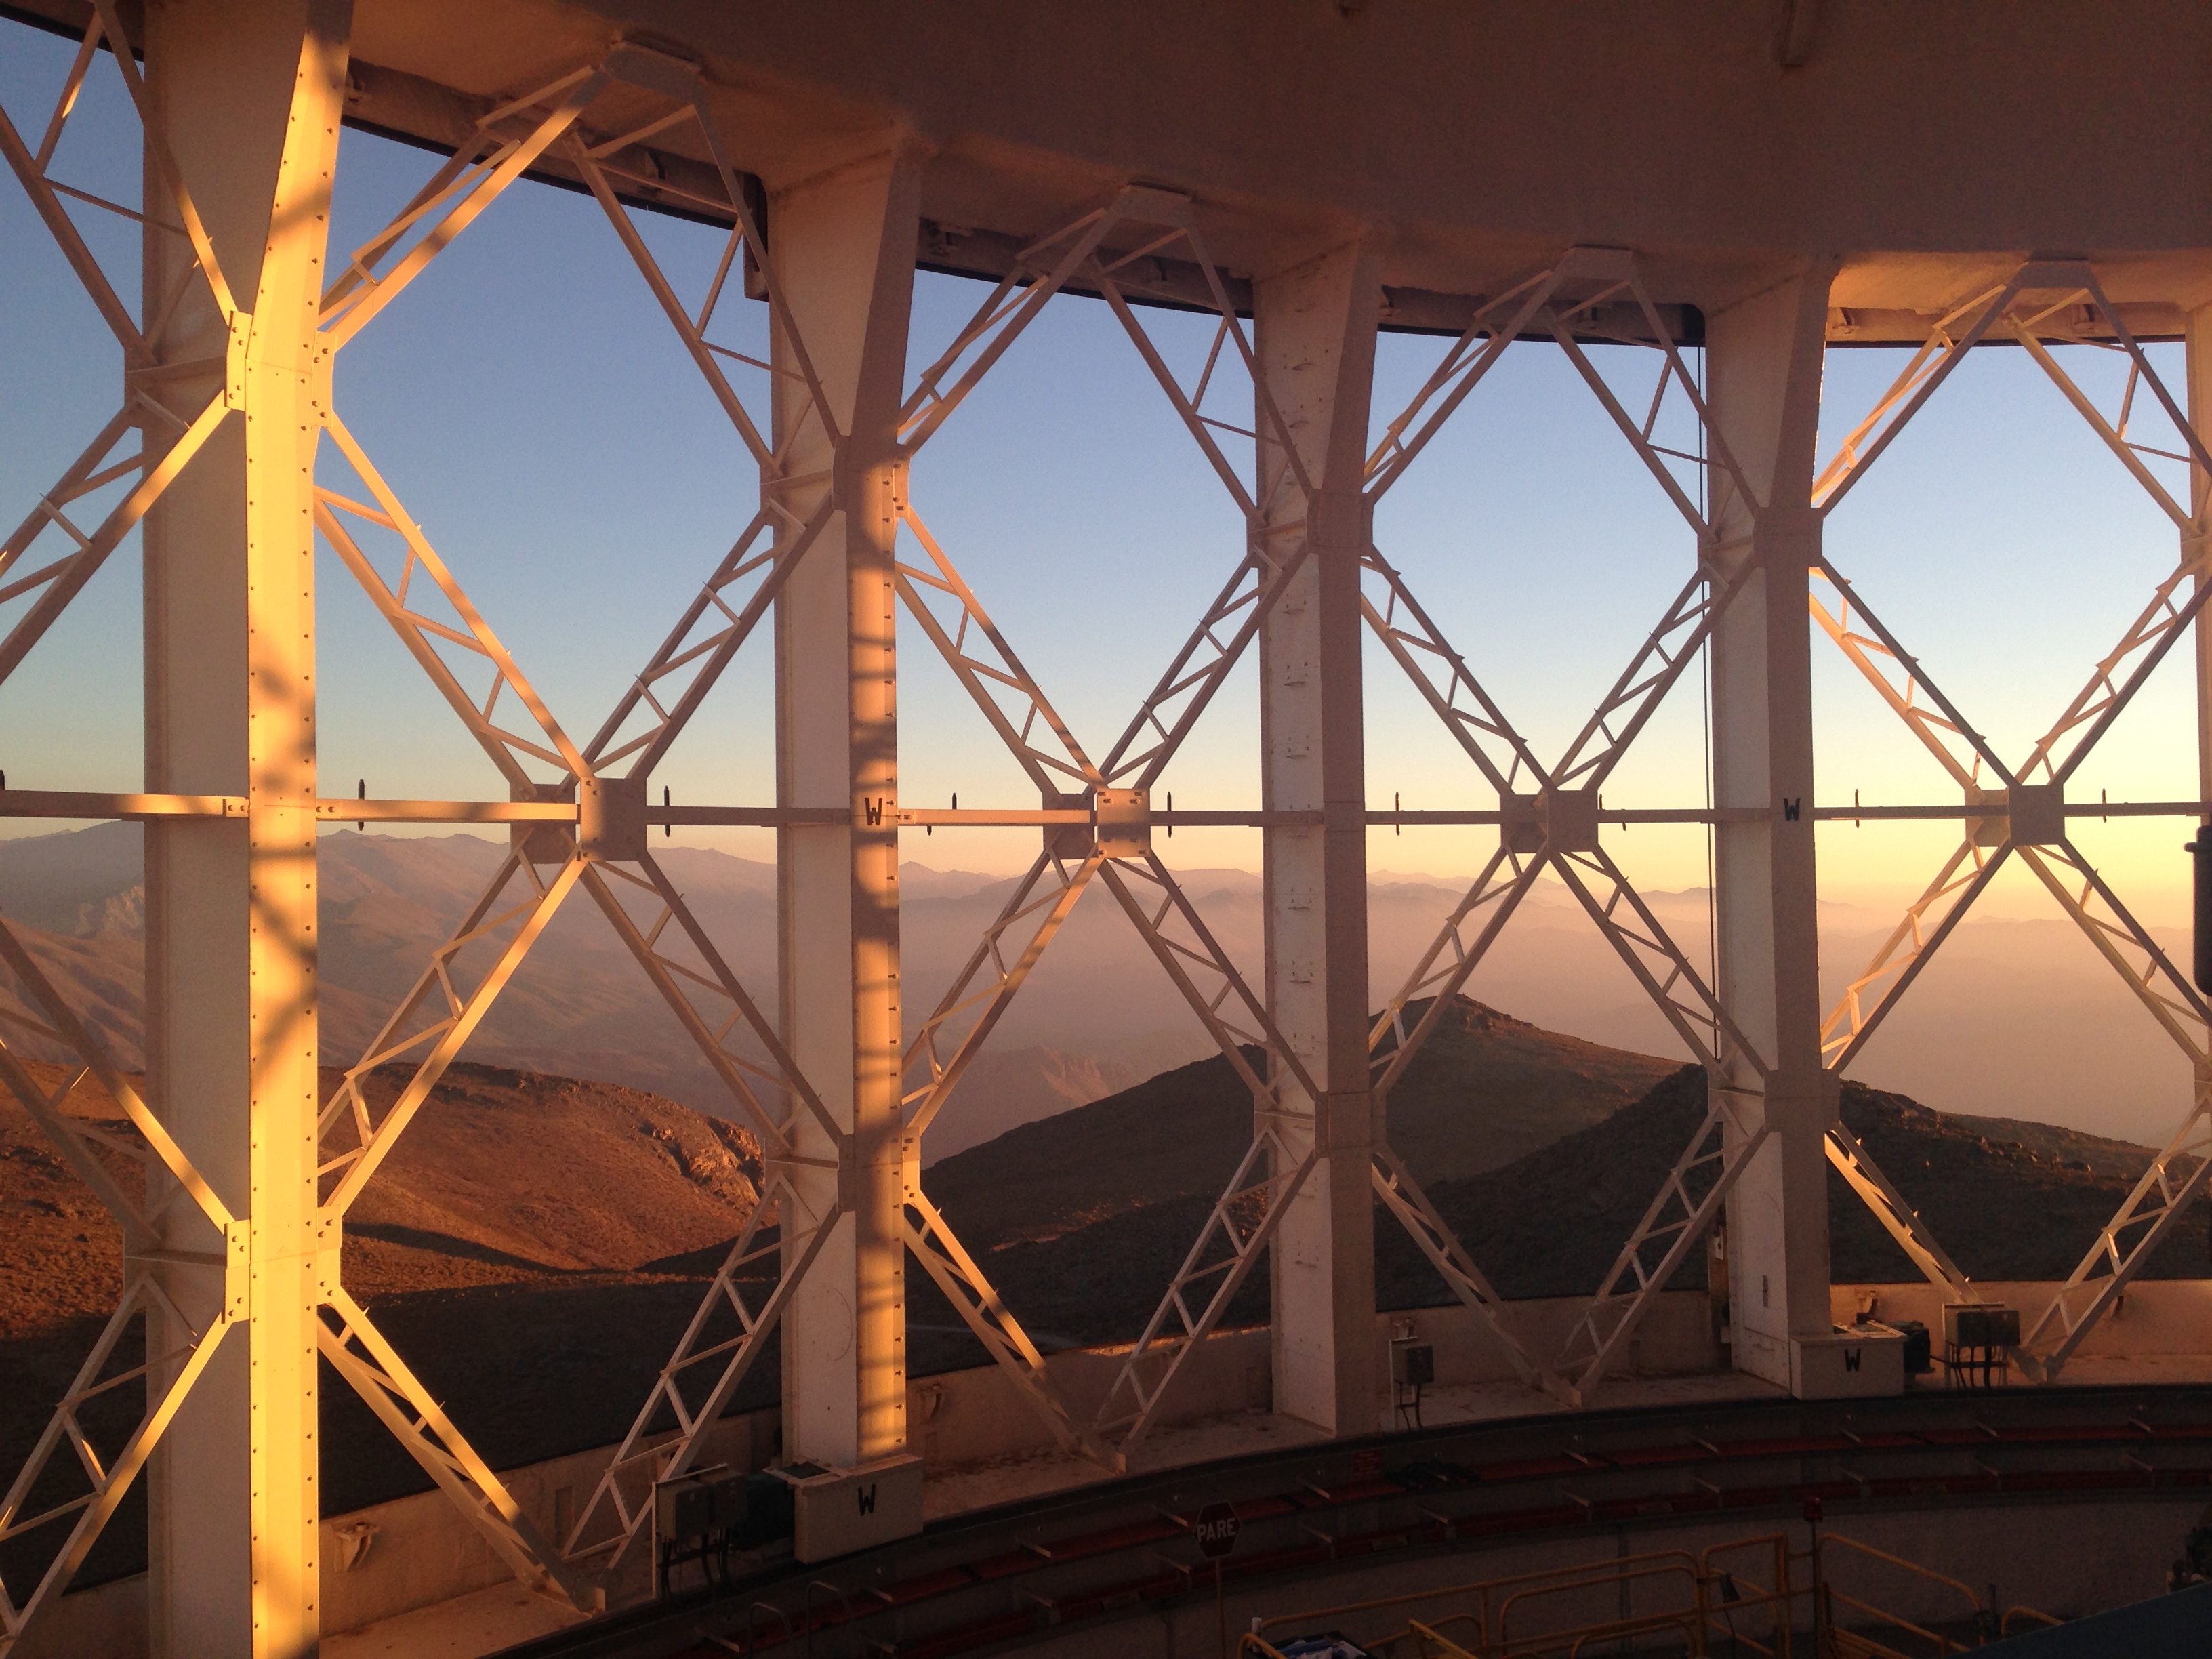 The landscape around Cerro Pachon as seen through the Gemini South Dome structure.